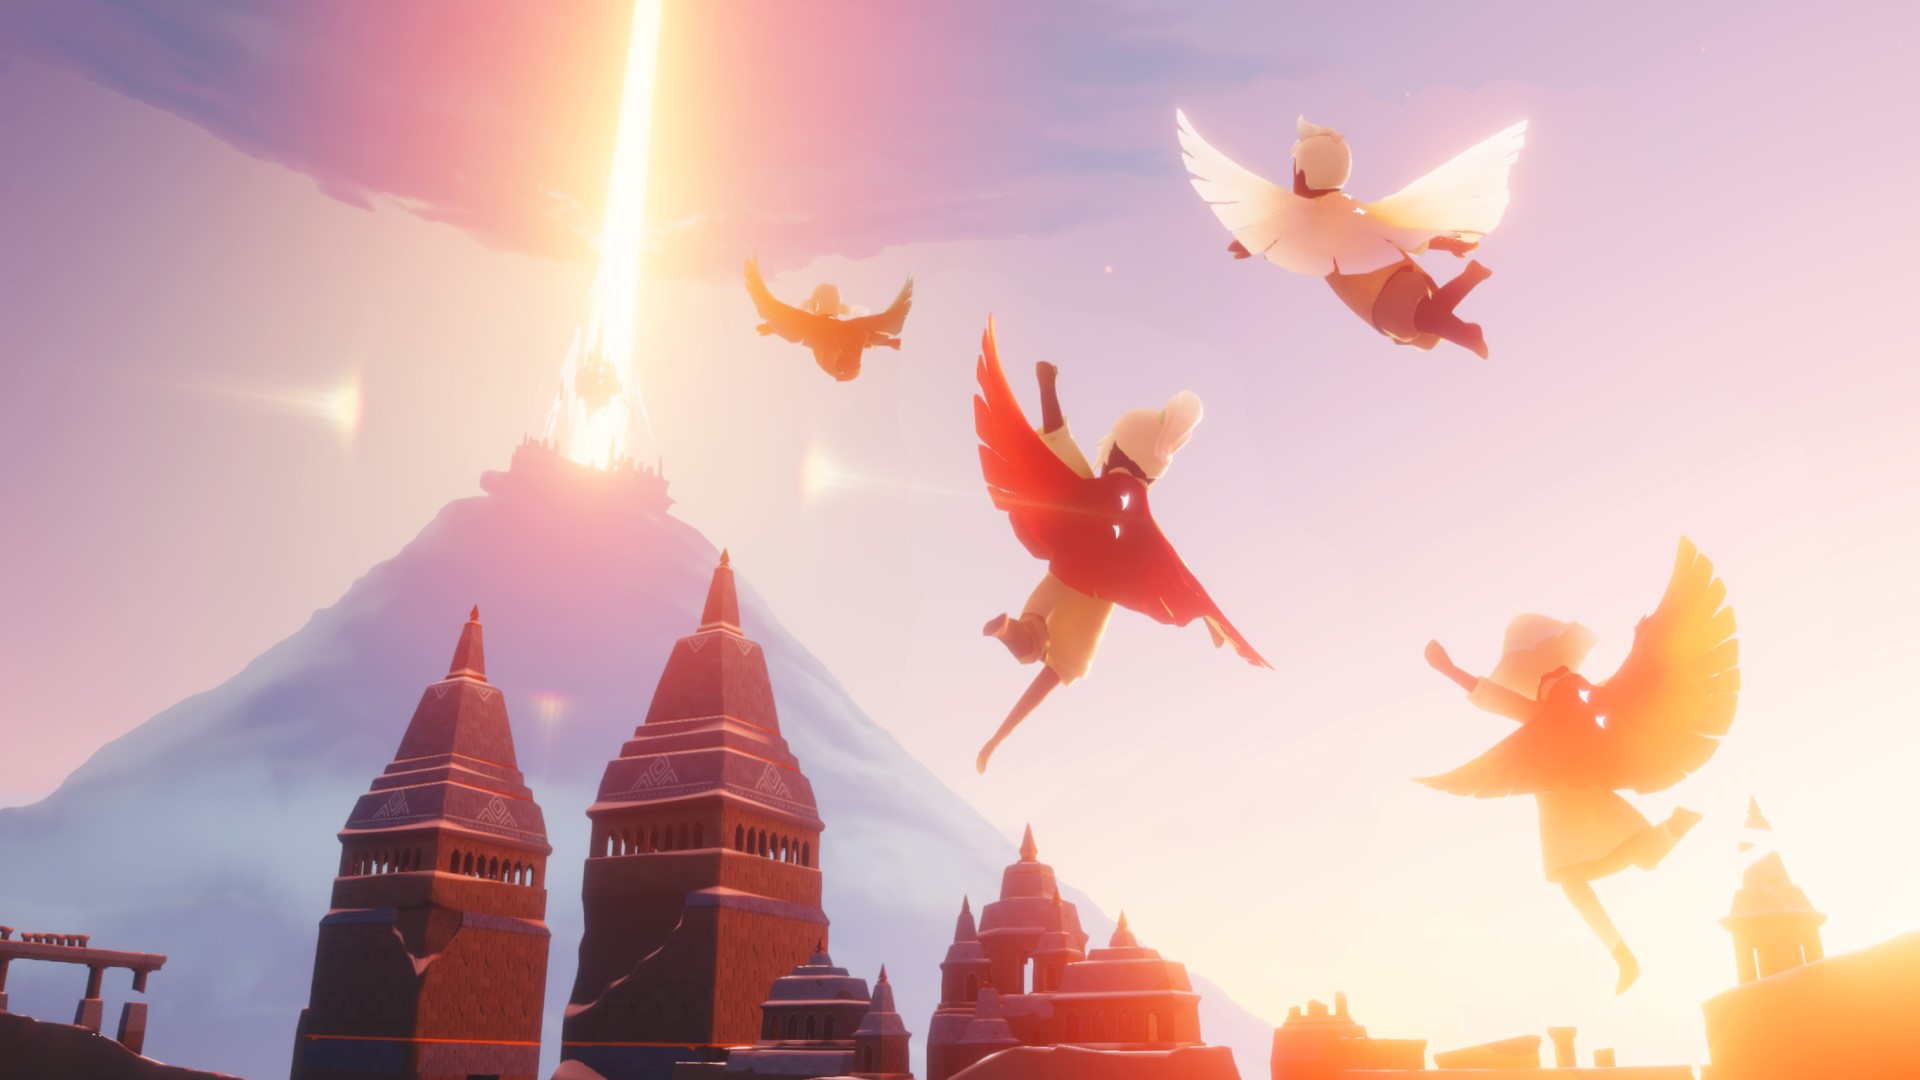 Best mobile multiplayer games: Sky: Children of the Light. Image shows angels flying in the sky.